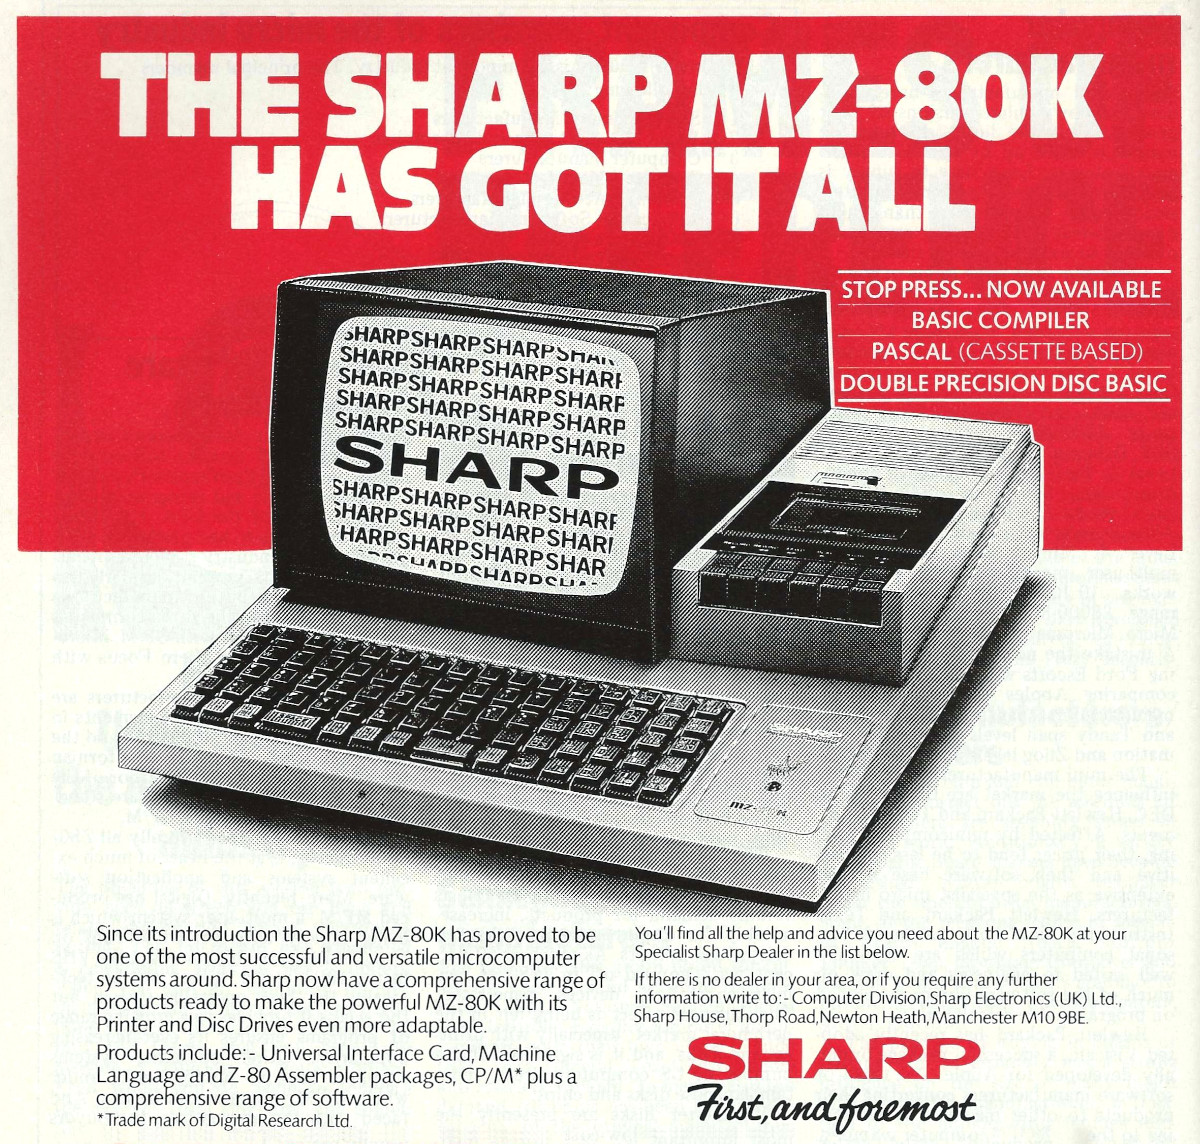 The MZ-80K - formerly just the MZ-80. From Personal Computer World, February 1982